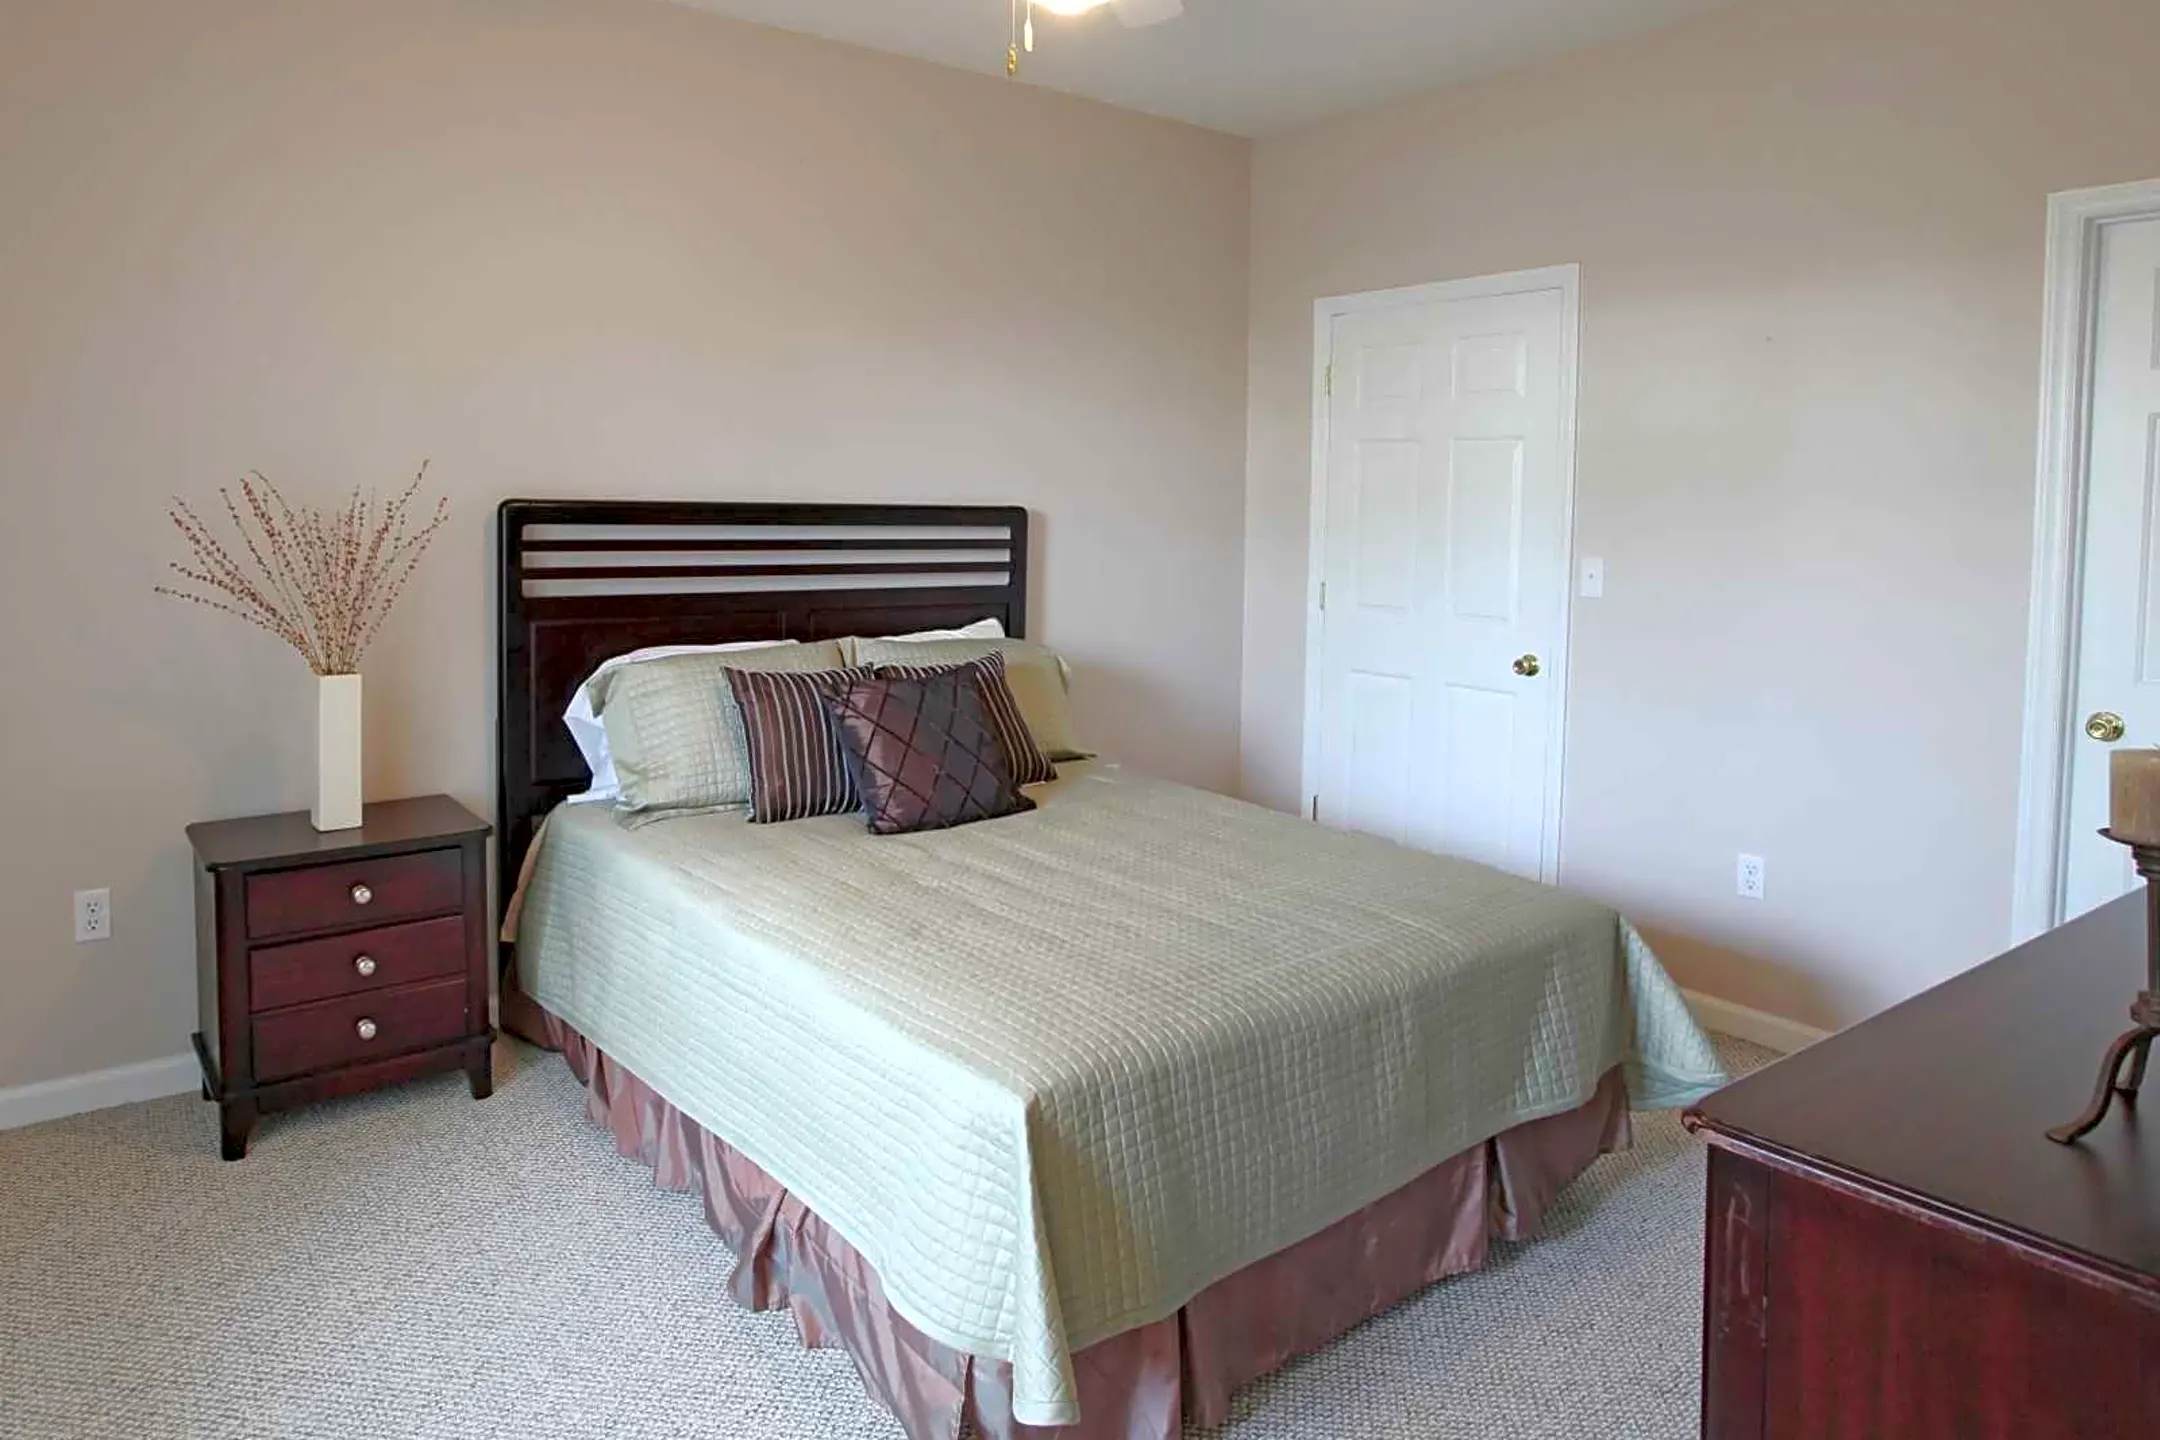 Bedroom - The Pointe at Wimbledon - Greenville, NC